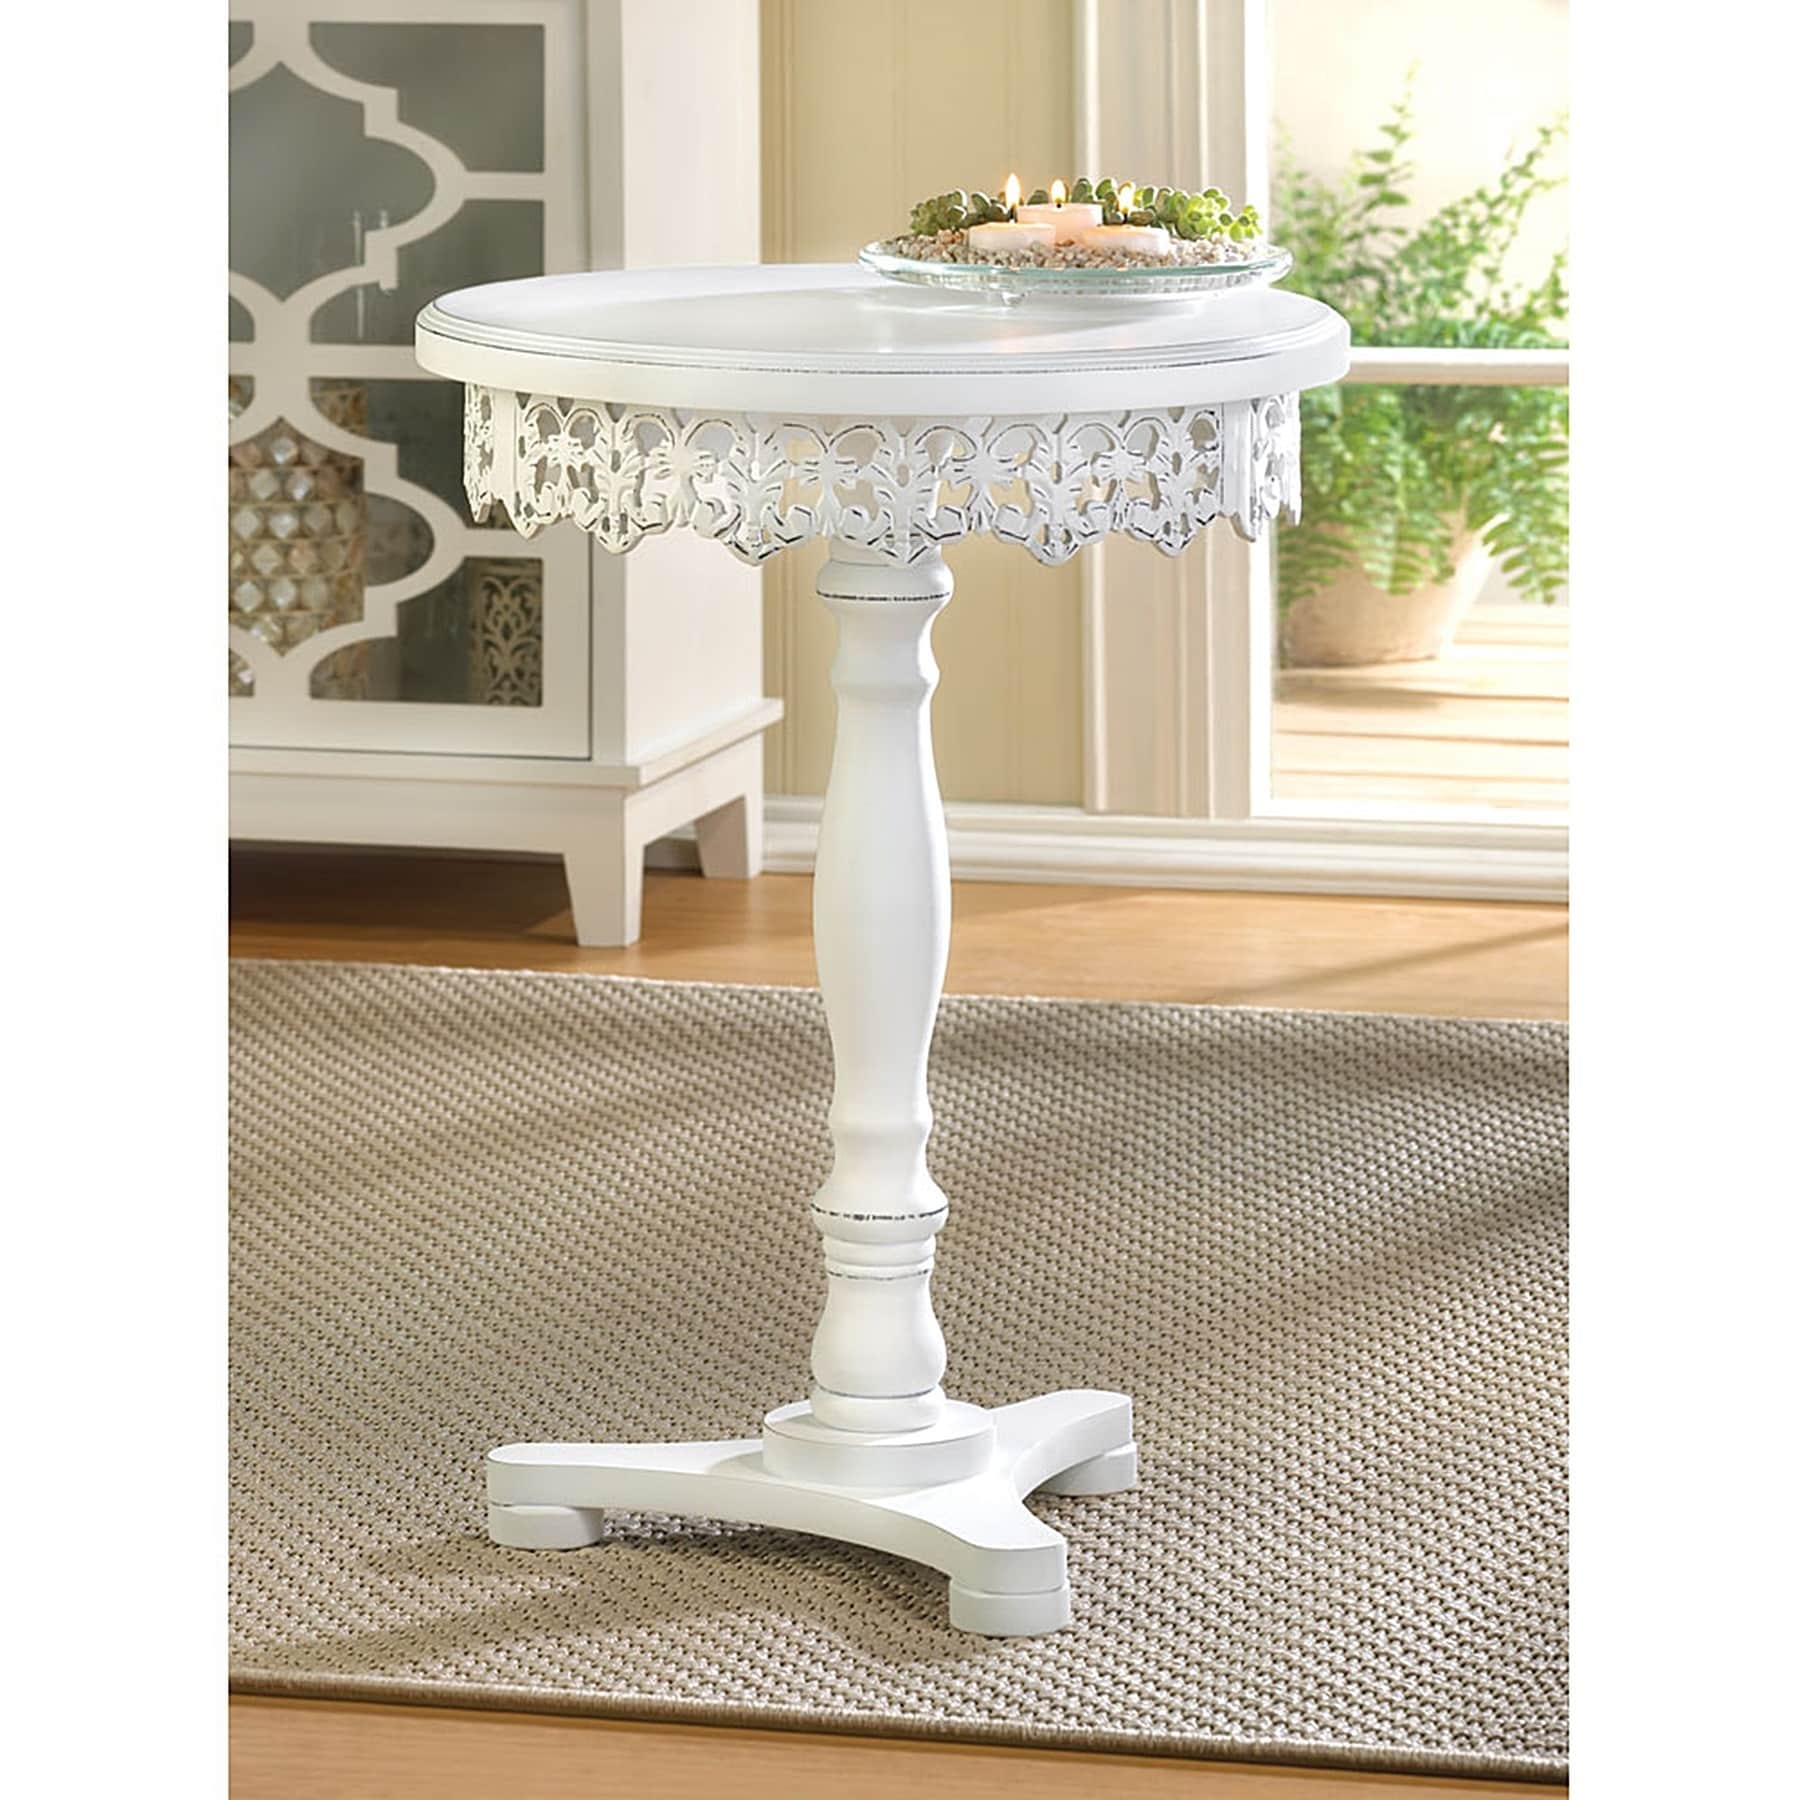 Lacy Antique White Finish Wooden Round Side Table Overstock 11902470